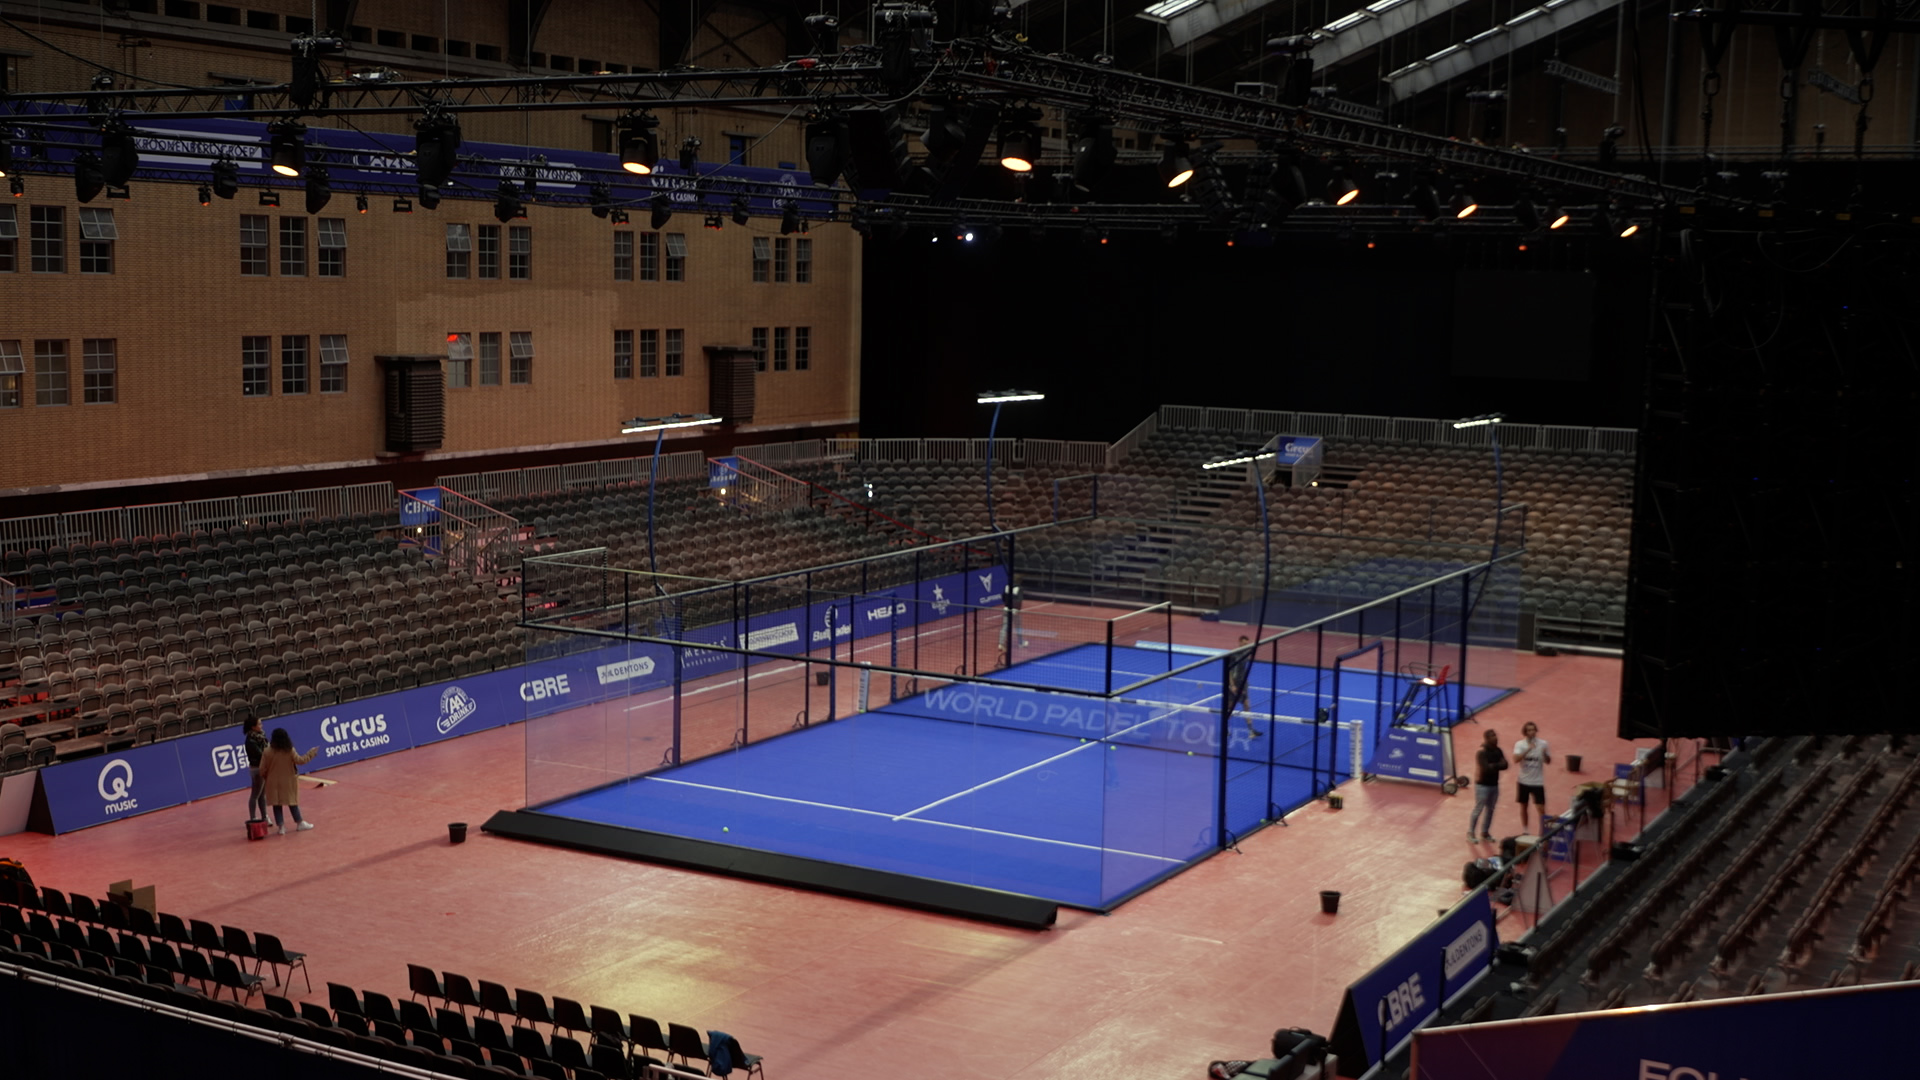 Amsterdam welcomes the best padel in the world for very first time